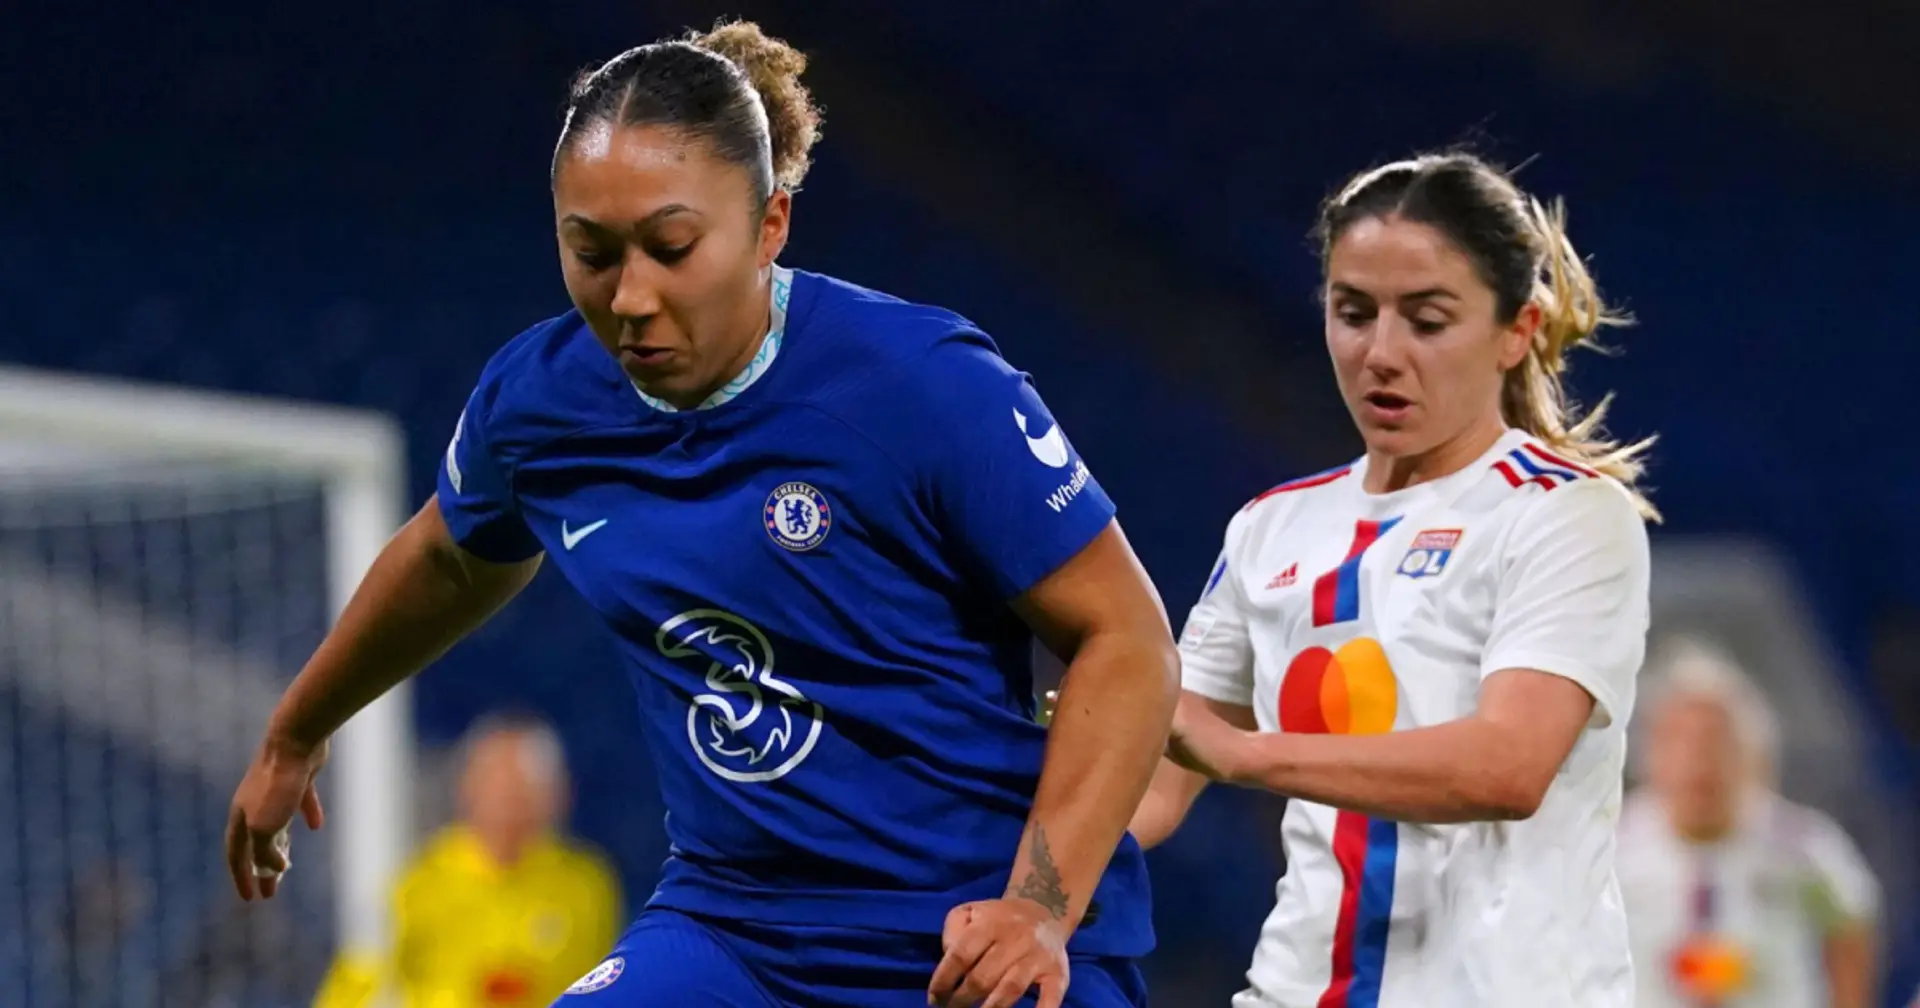 Chelsea Women through to Champions League semi-finals after beating holders Lyon in shootout